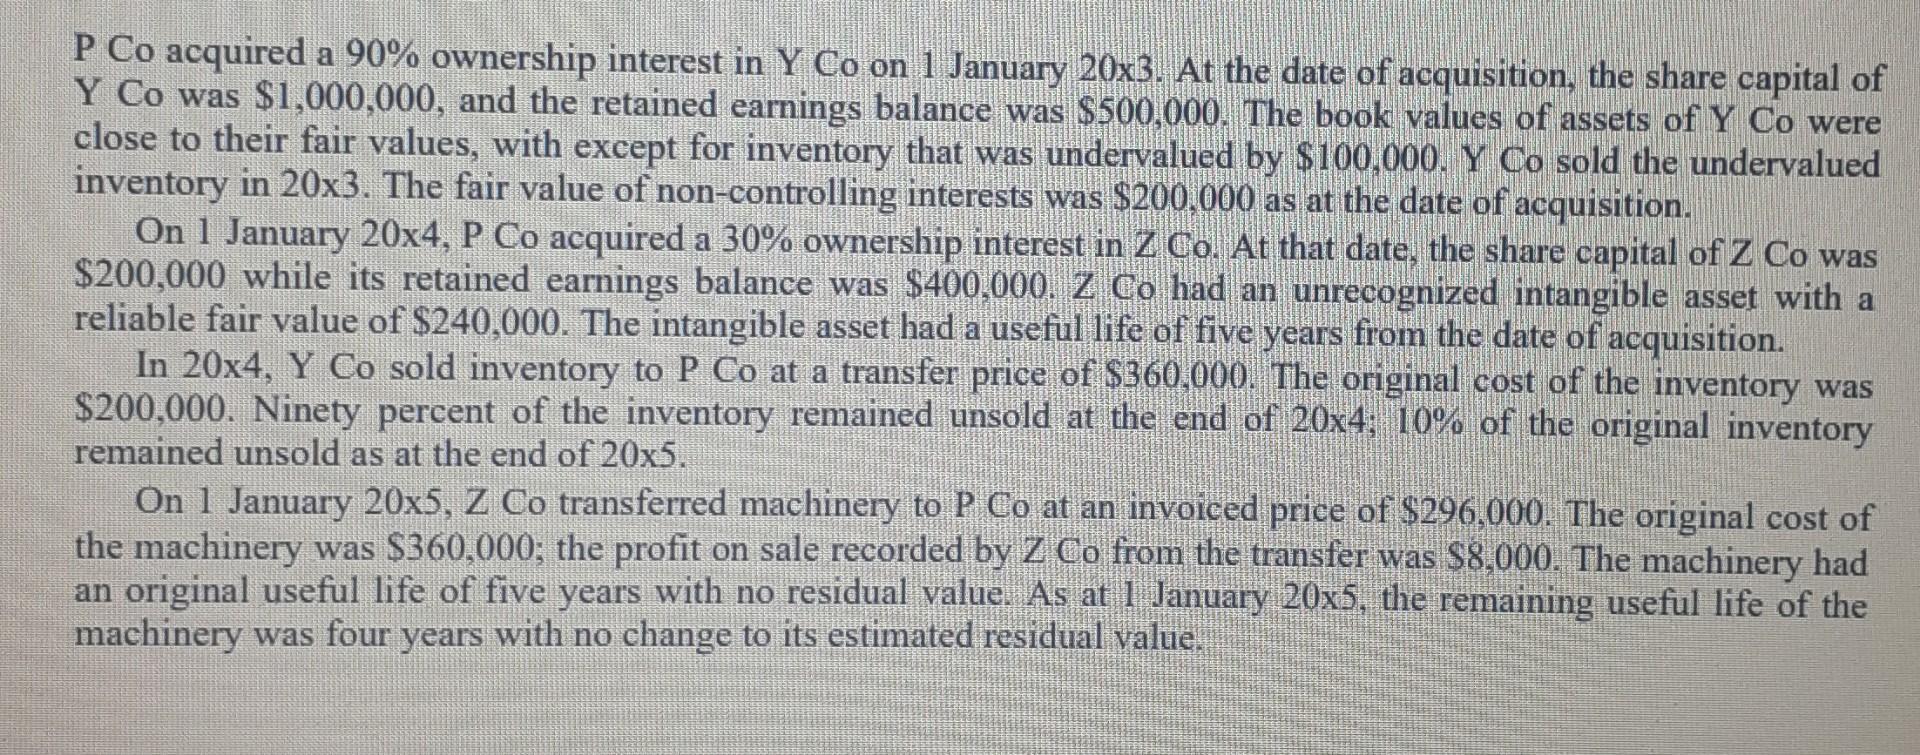 P Co acquired a ( 90 % ) ownership interest in Y Co on 1 January 20x3. At the date of acquisition, the share capital of (